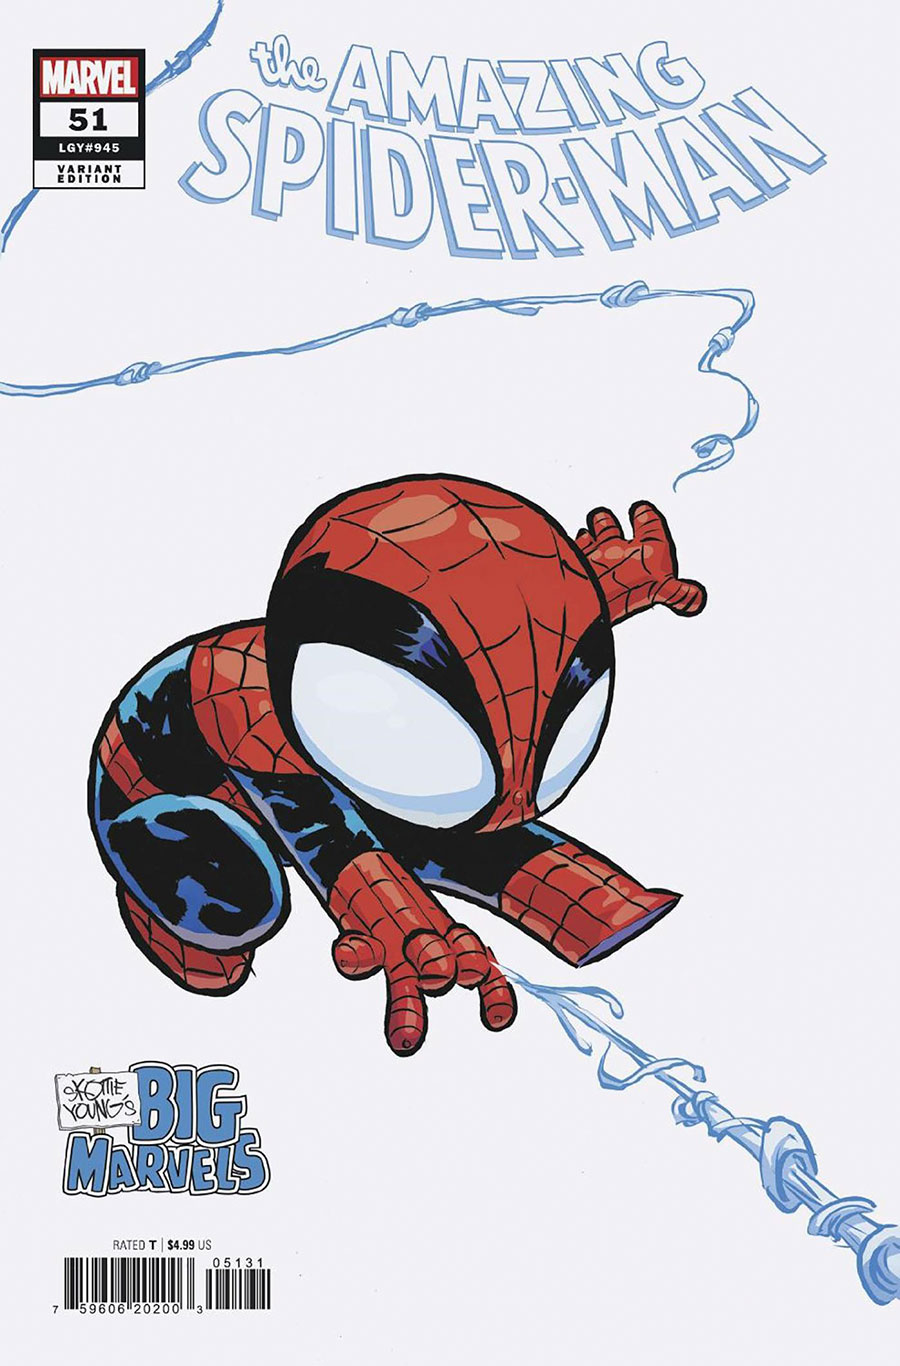 Amazing Spider-Man Vol 6 #51 Cover C Variant Skottie Youngs Big Marvels Cover